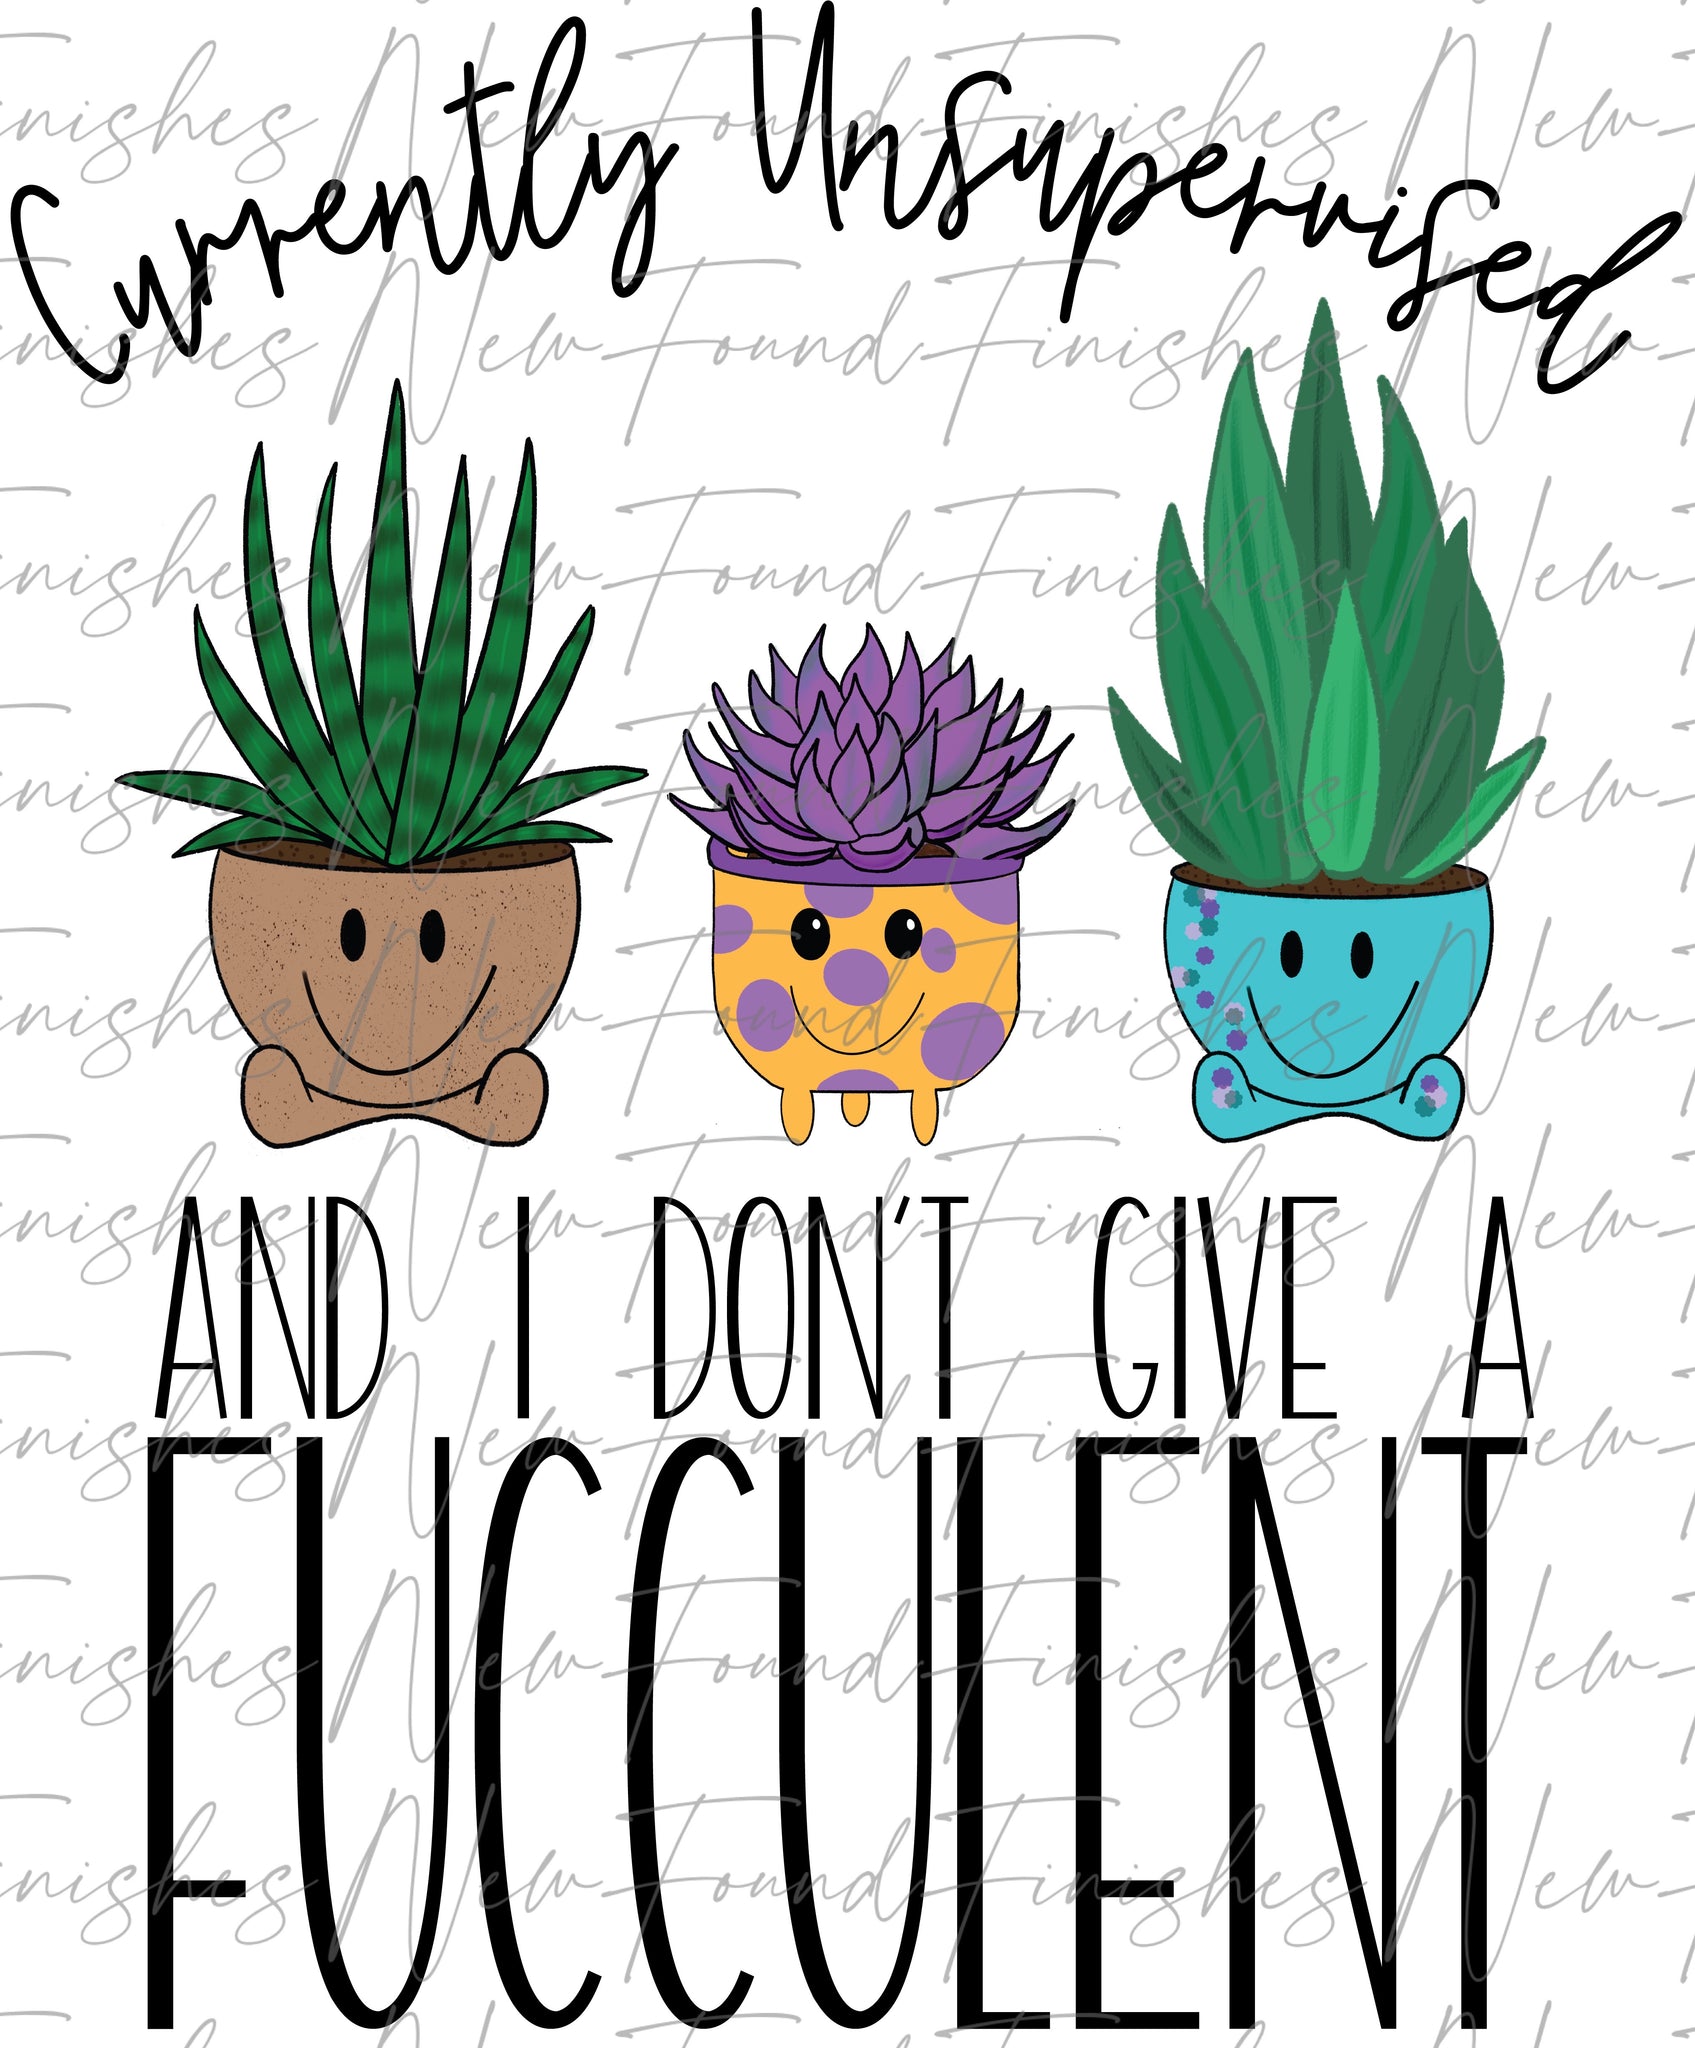 Don’t give a succulent